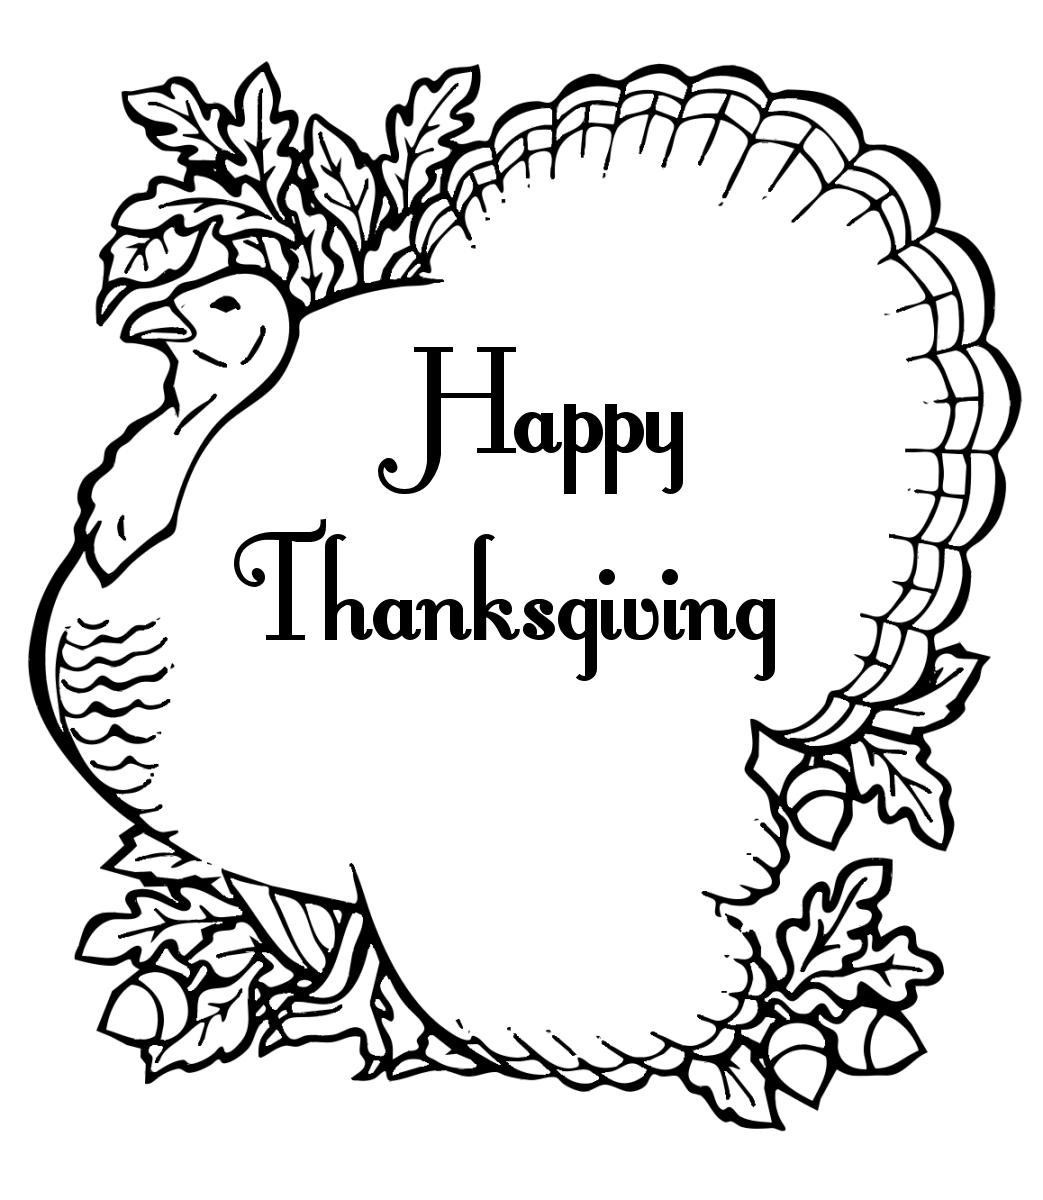 Clipart   Public Domain Thanksgiving Clip Art Images And Graphics